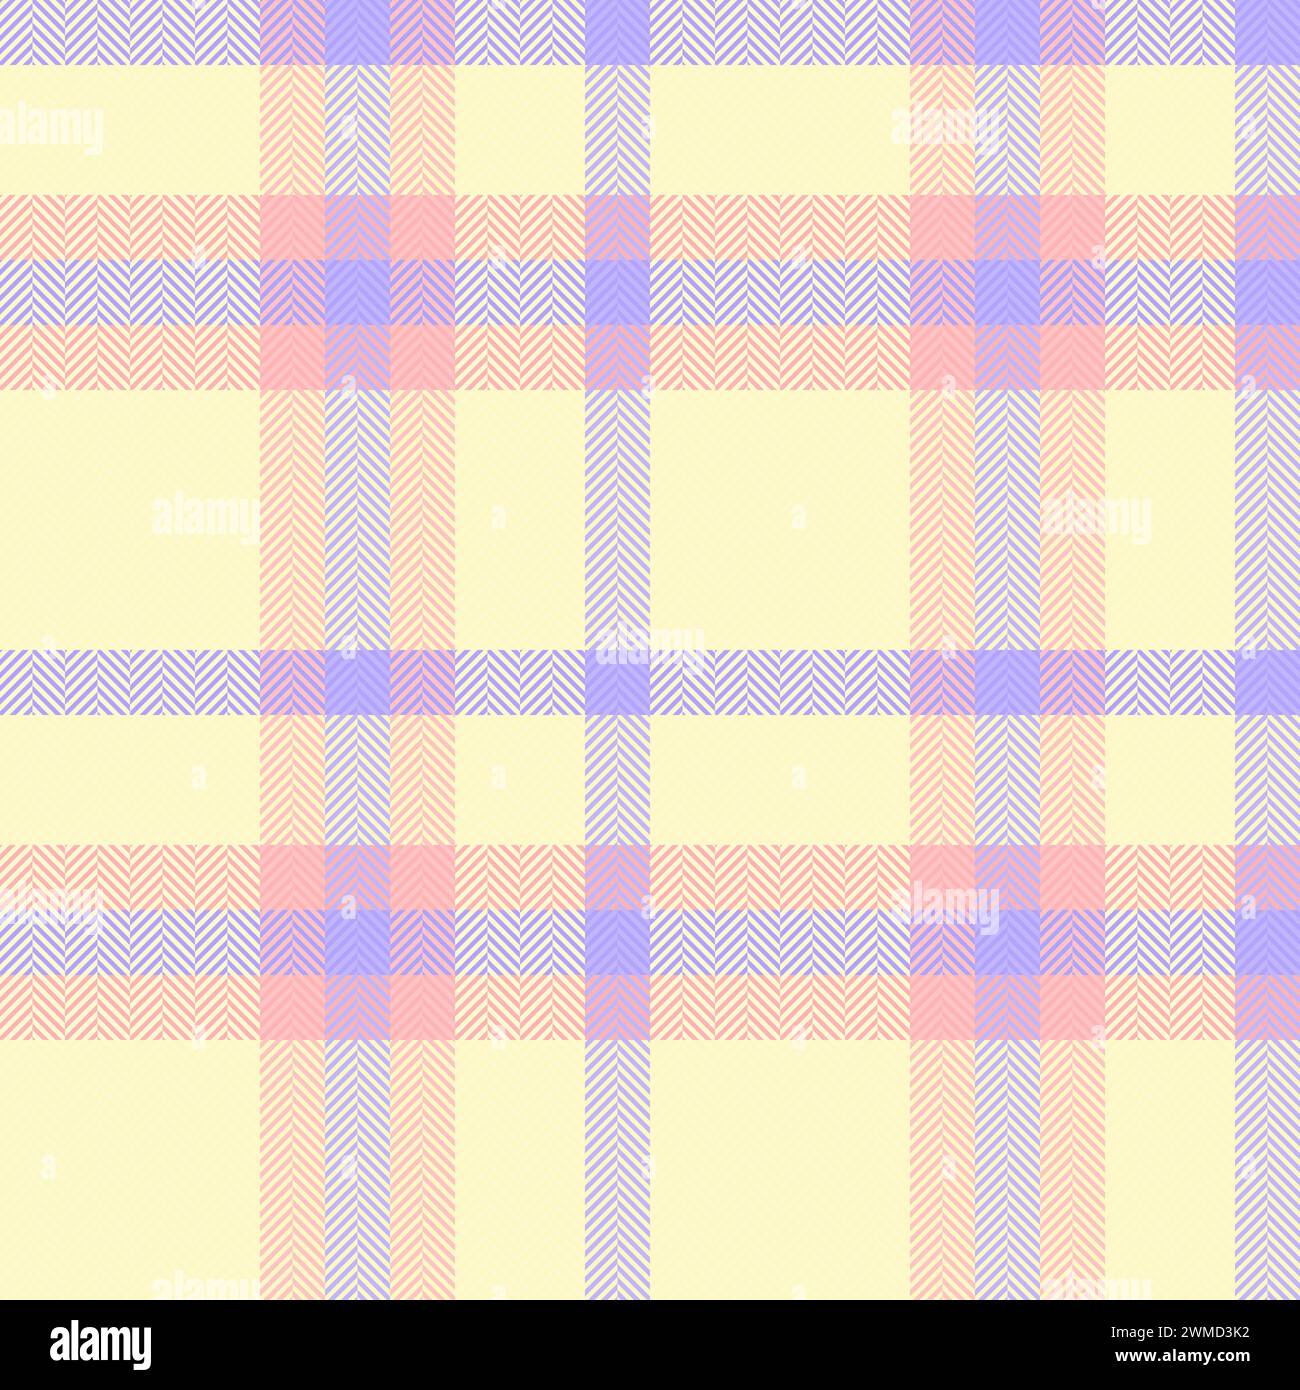 Tartan texture seamless of fabric vector textile with a check plaid background pattern in light and lemon chiffon colors. Stock Vector